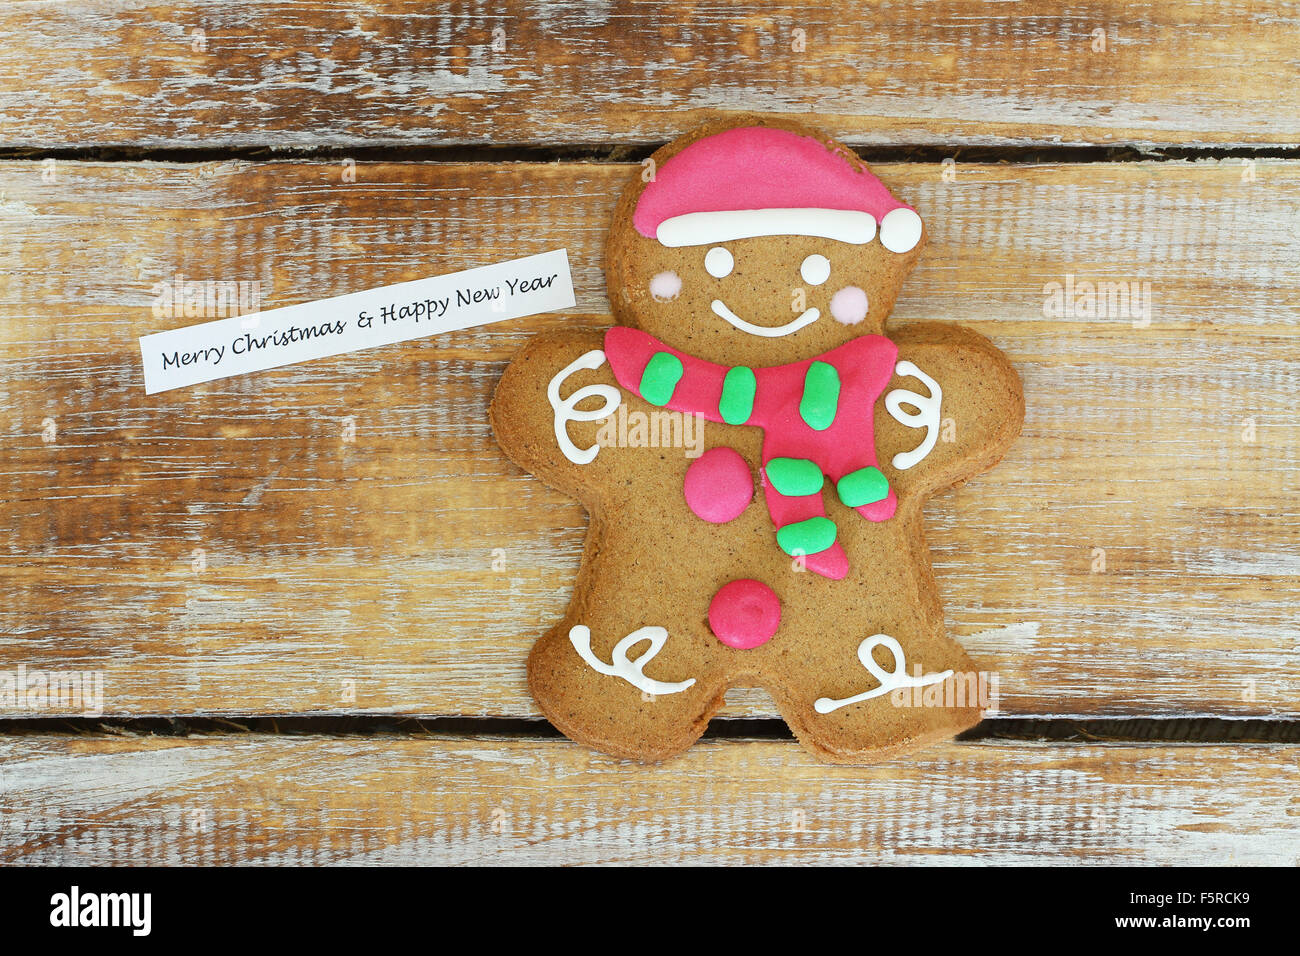 Merry Christmas & Happy New Year card with gingerbread man on wooden surface Stock Photo